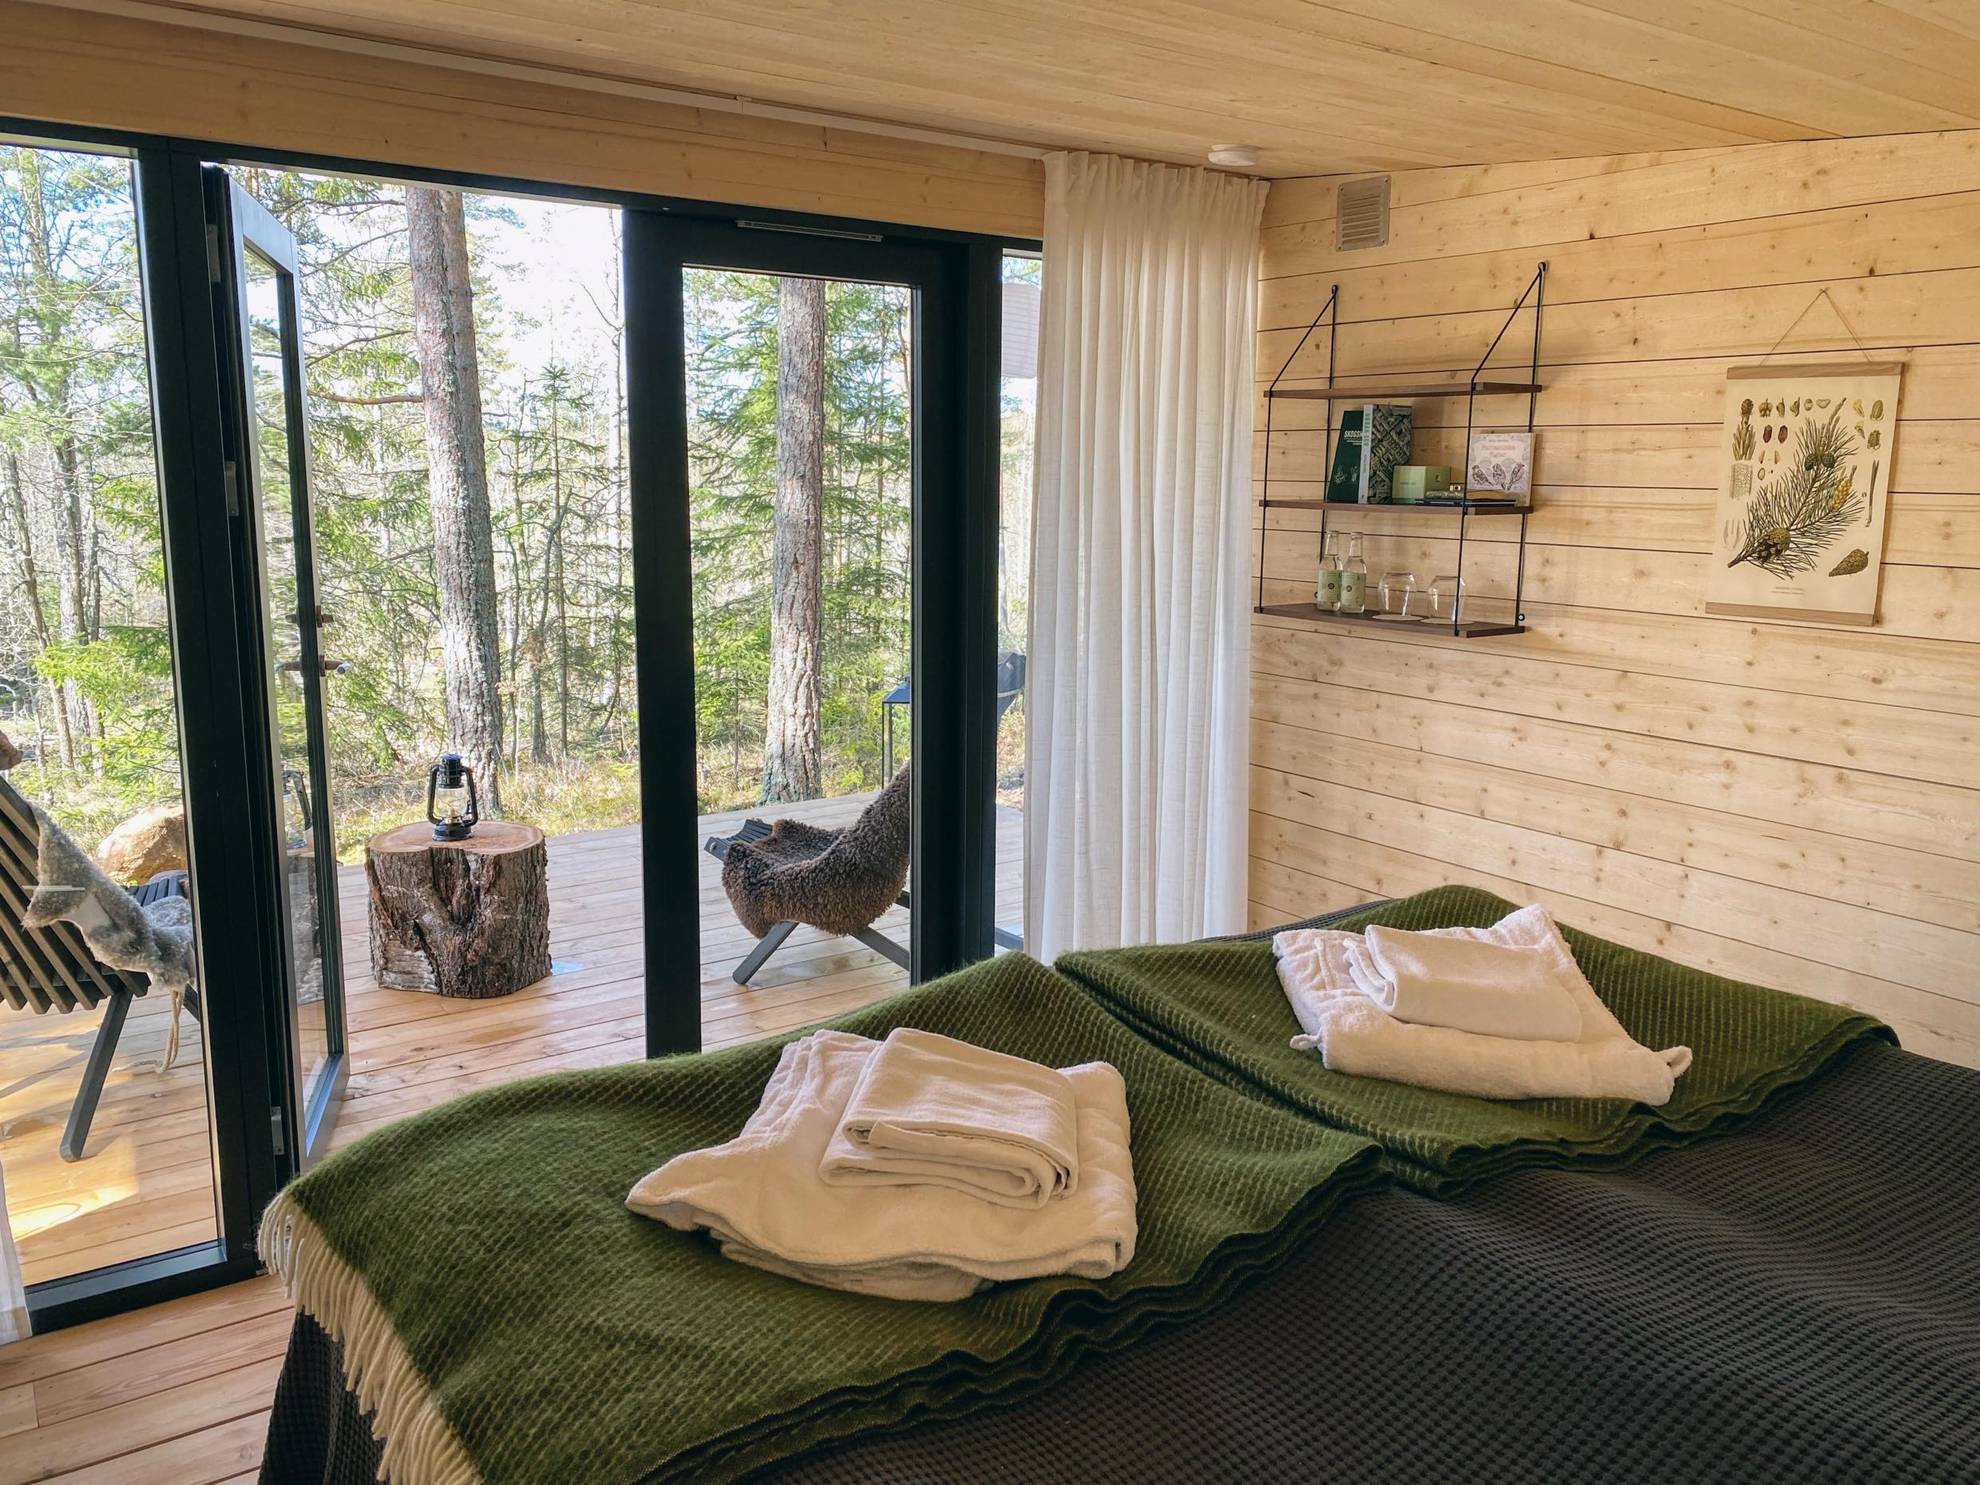 Two beds are in a room with wooden walls and floor. The room has glass doors to a patio with two chairs overlooking nature.